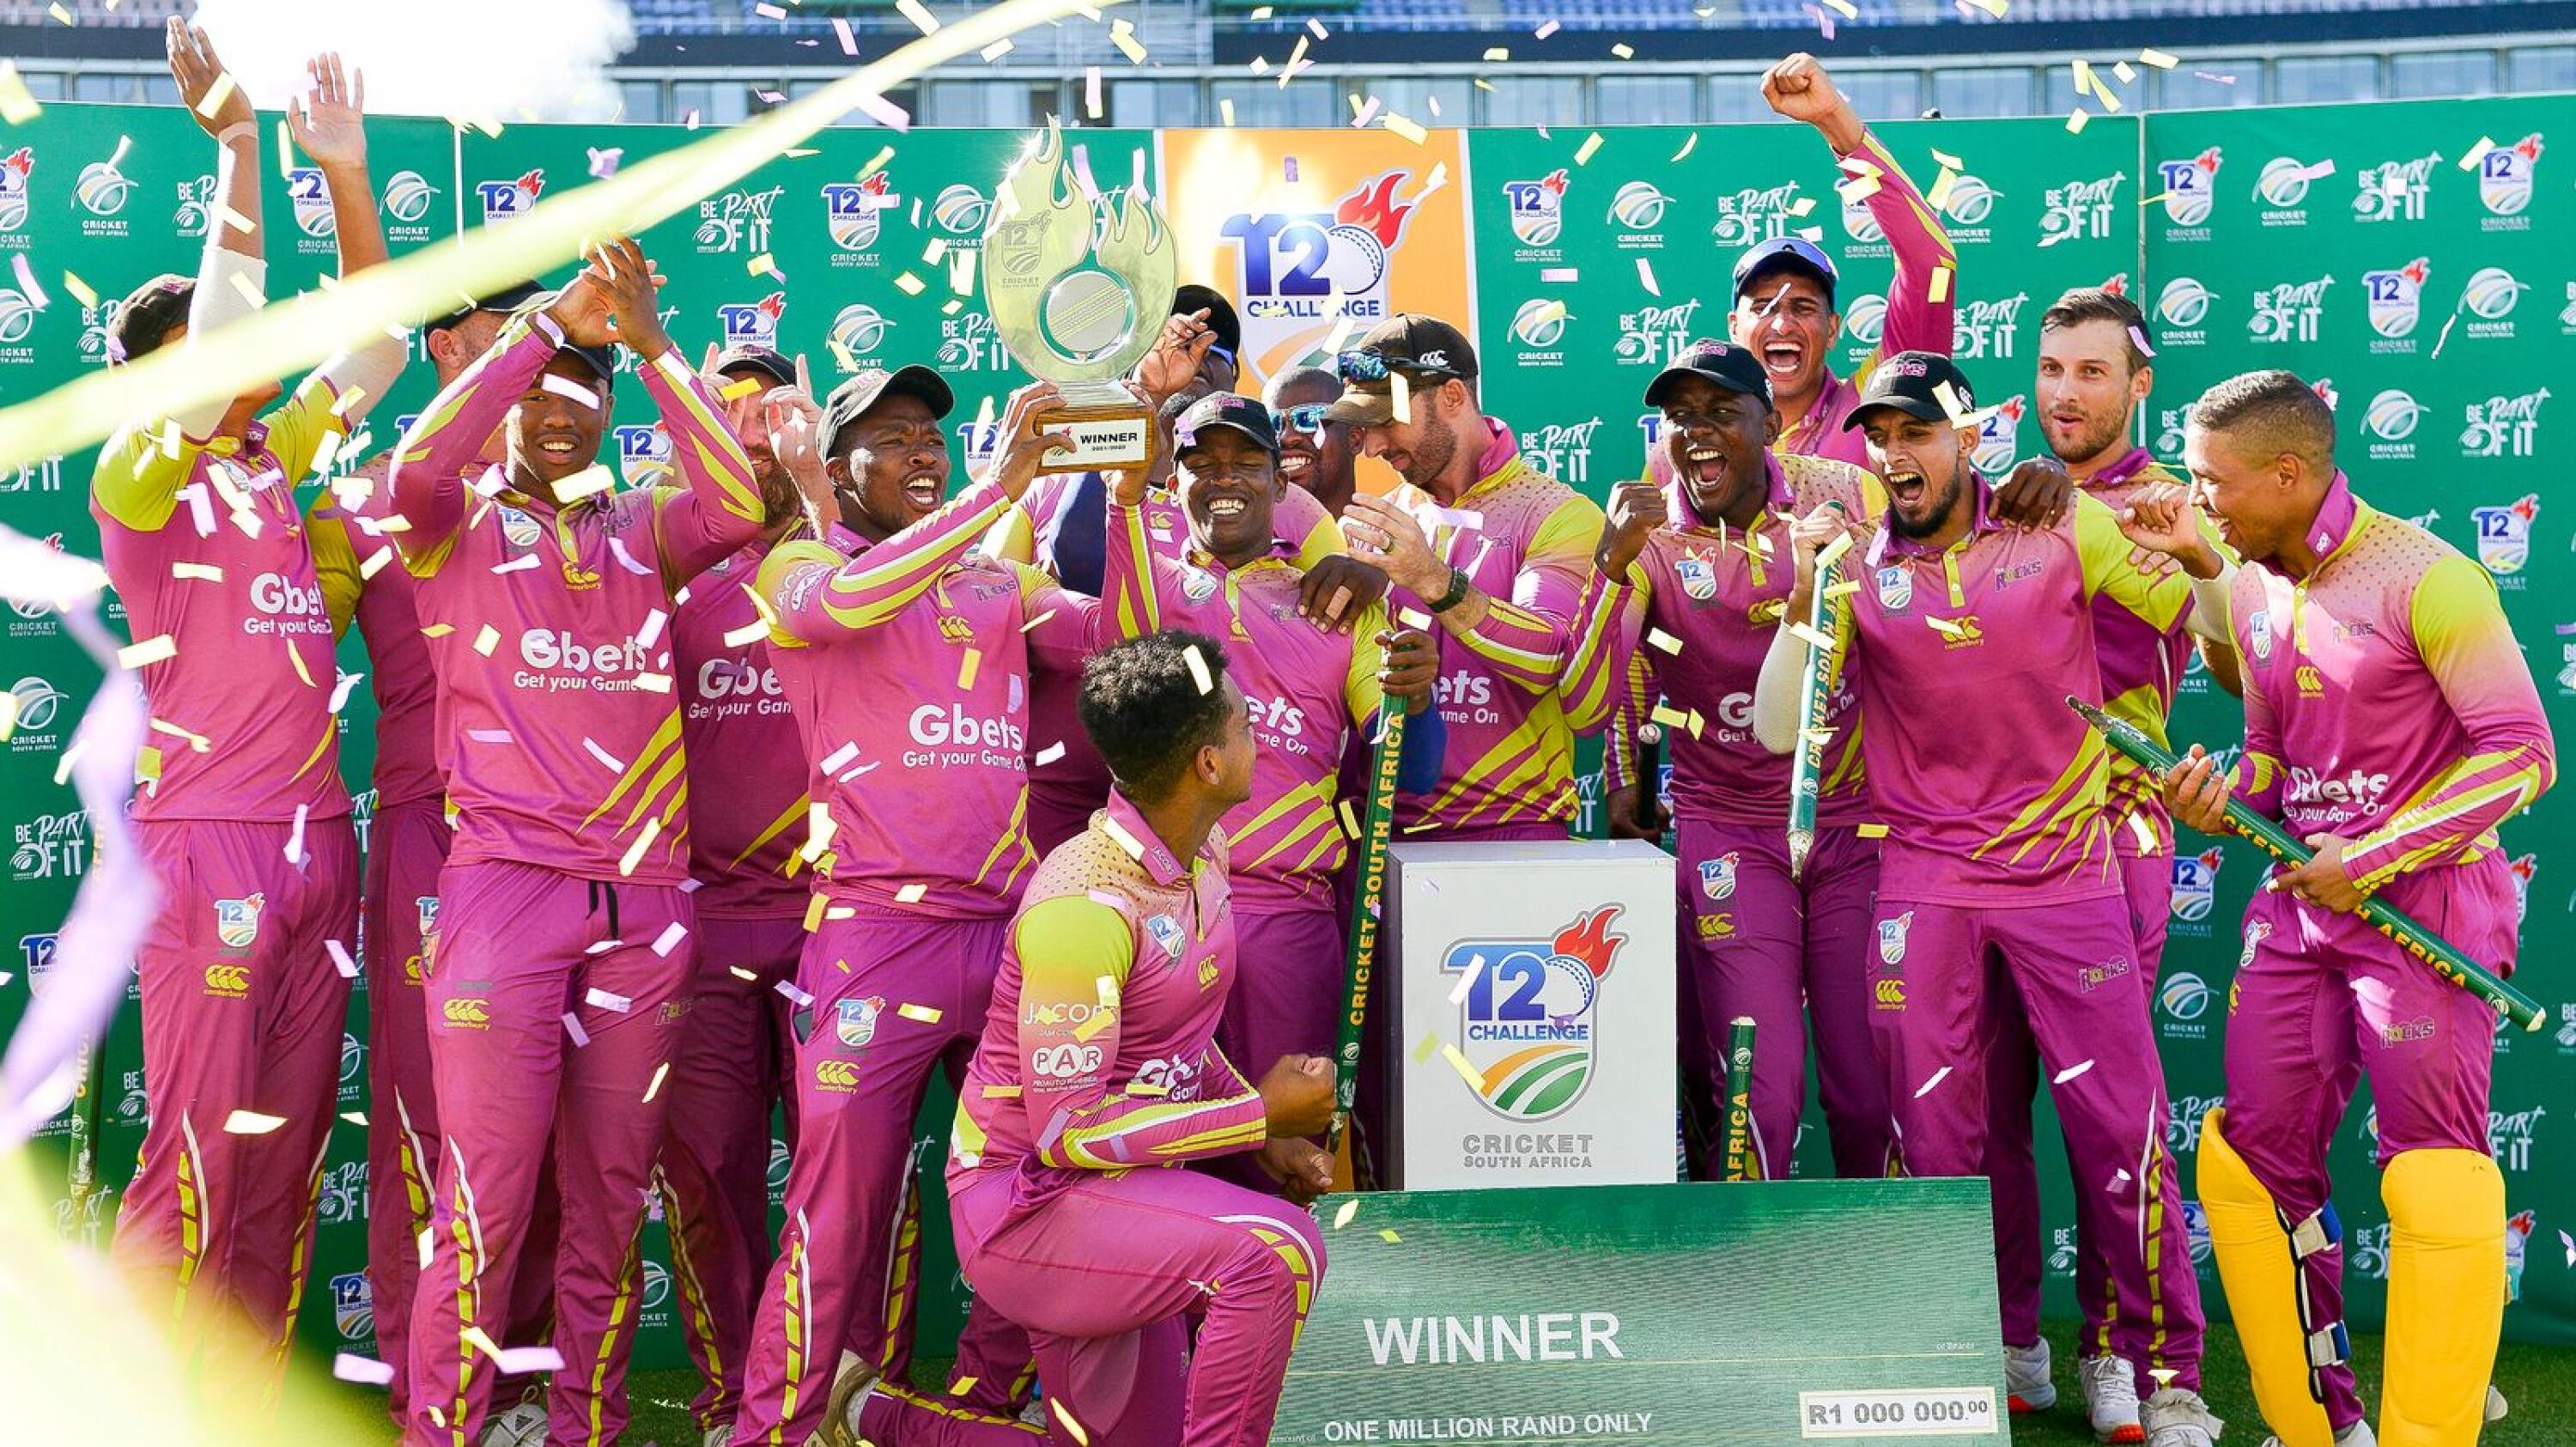 Rocks players celebrate with the trophy after beating the Titans in the fina of the CSA T20 Challenge at St George’s Park in Gqeberha